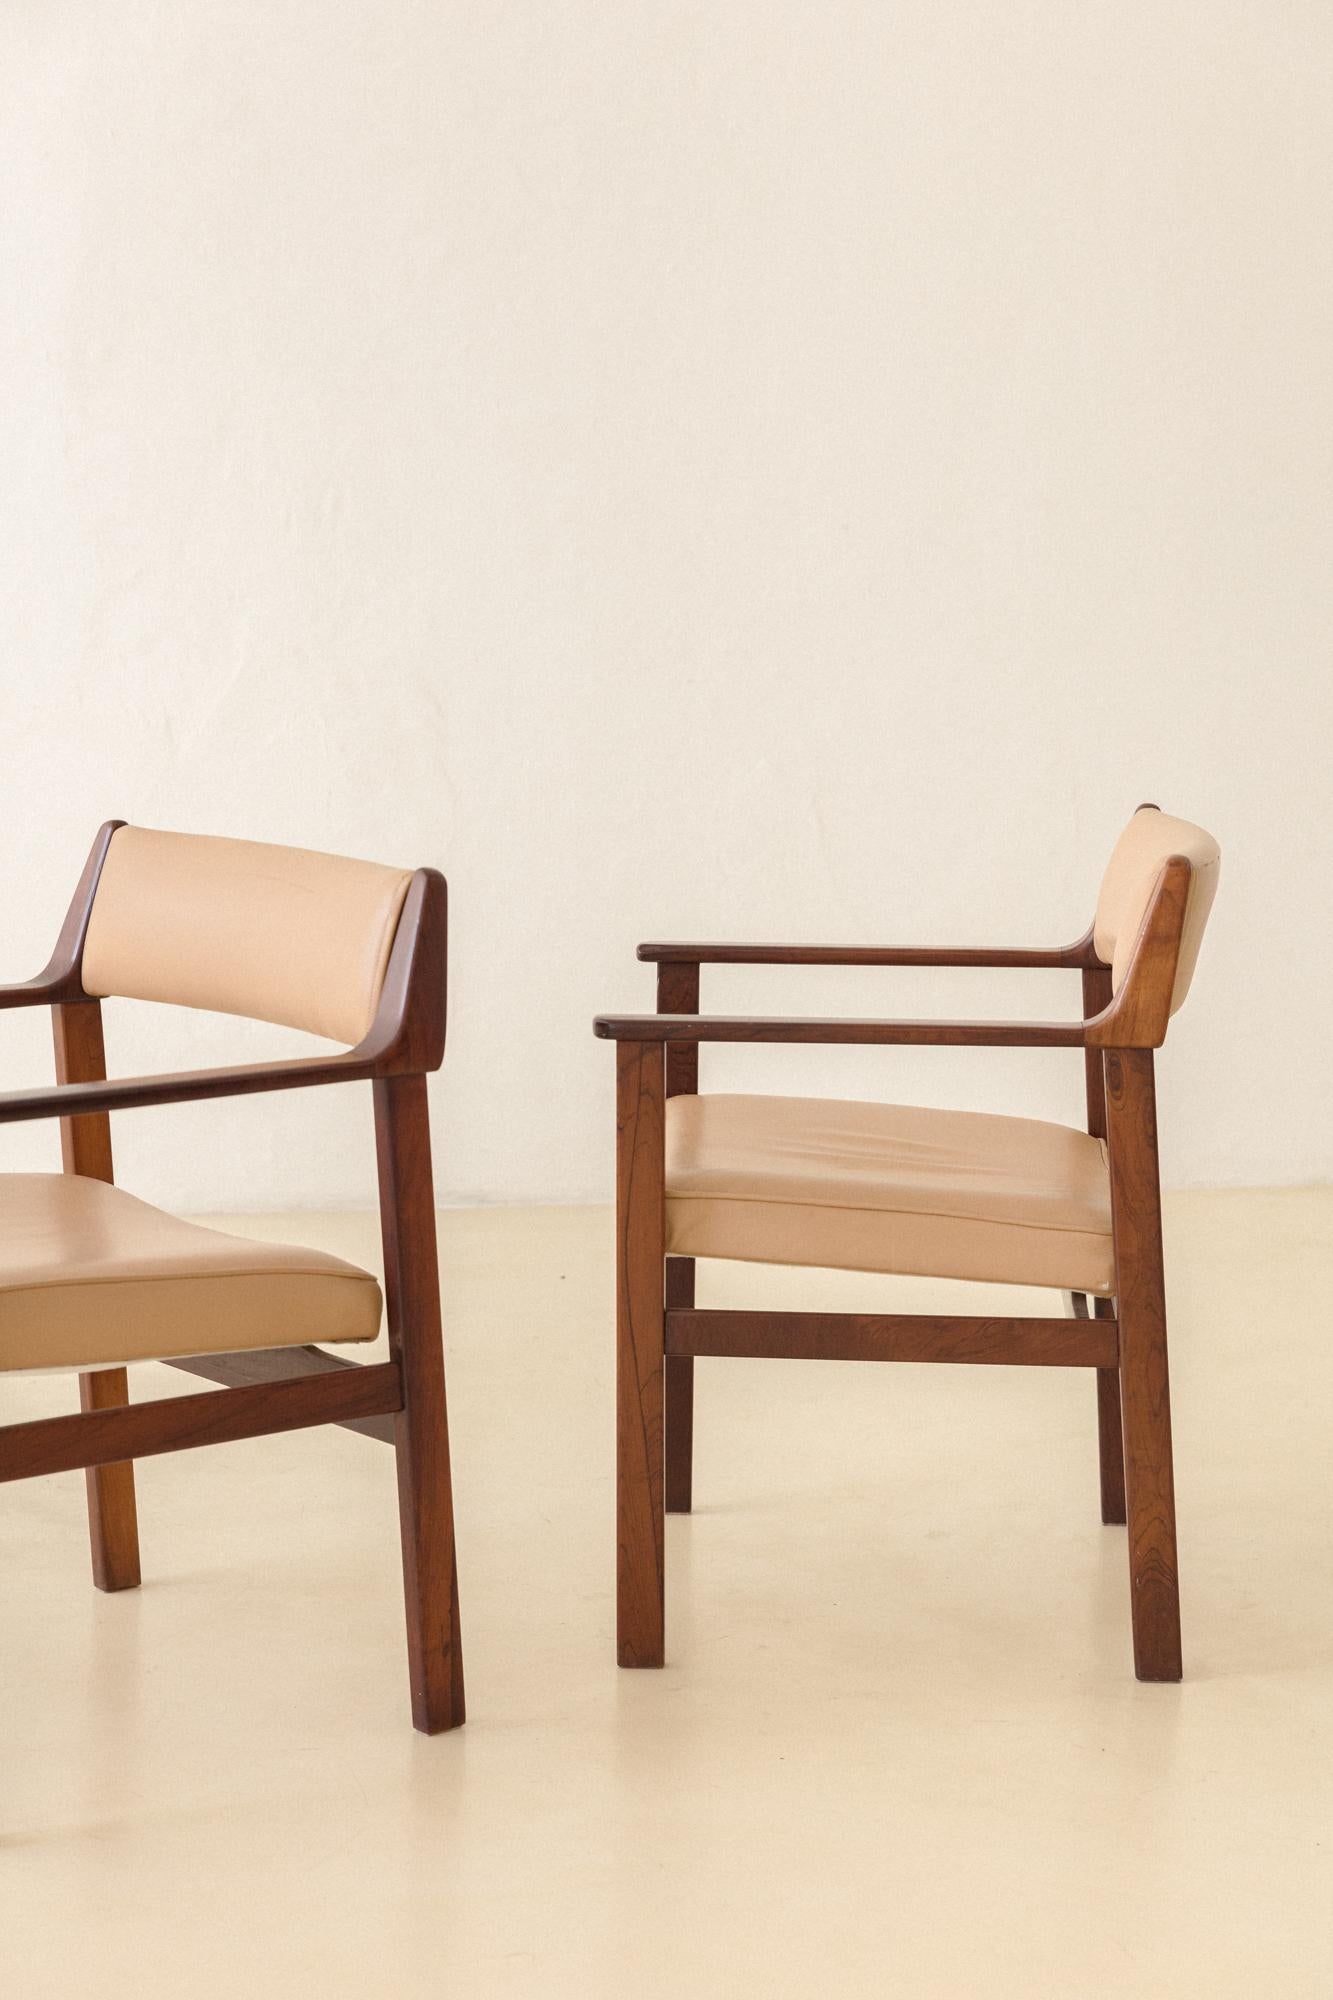 Pair of Solid Rosewood Chairs with Armrests by Brazilian Company Casulo, 1960s For Sale 3